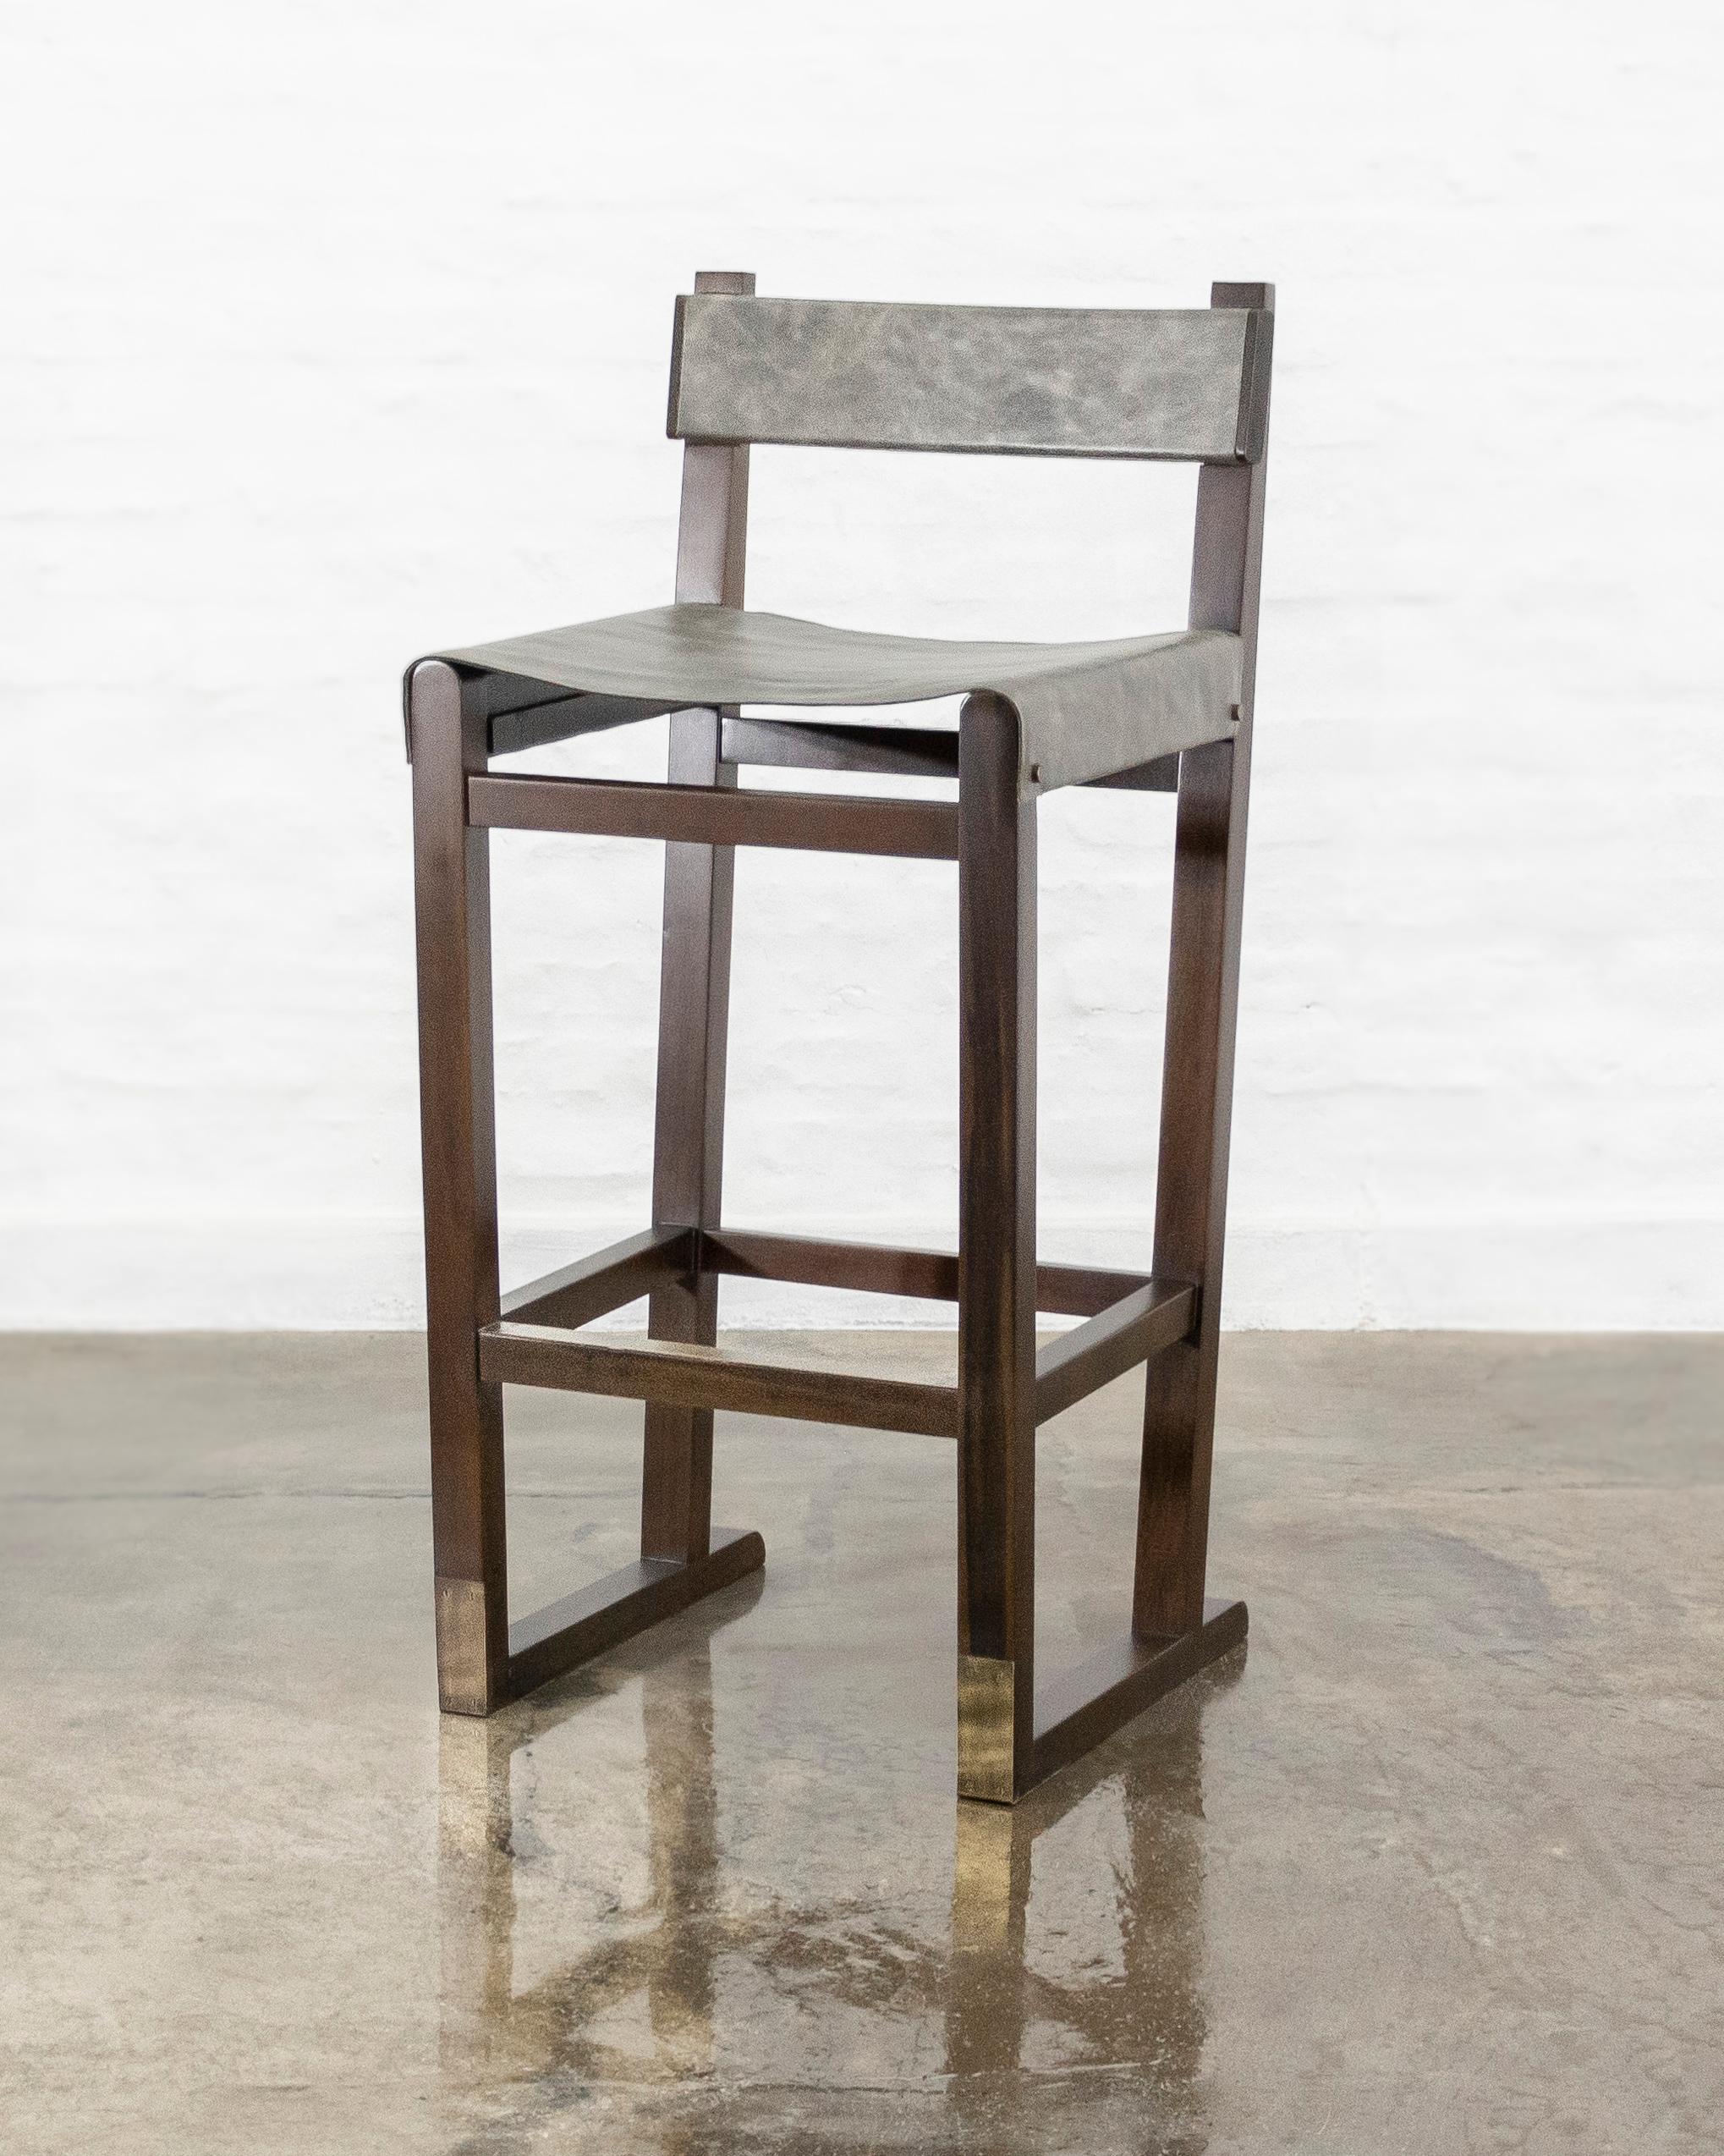 Costantini prides itself in using the hardest and most beautiful hardwoods in the construction of its line of seating. The Piero Bar Stool features a solid Argentine Rosewood frame with a slung leather seat, a leather-wrapped wood back, and a